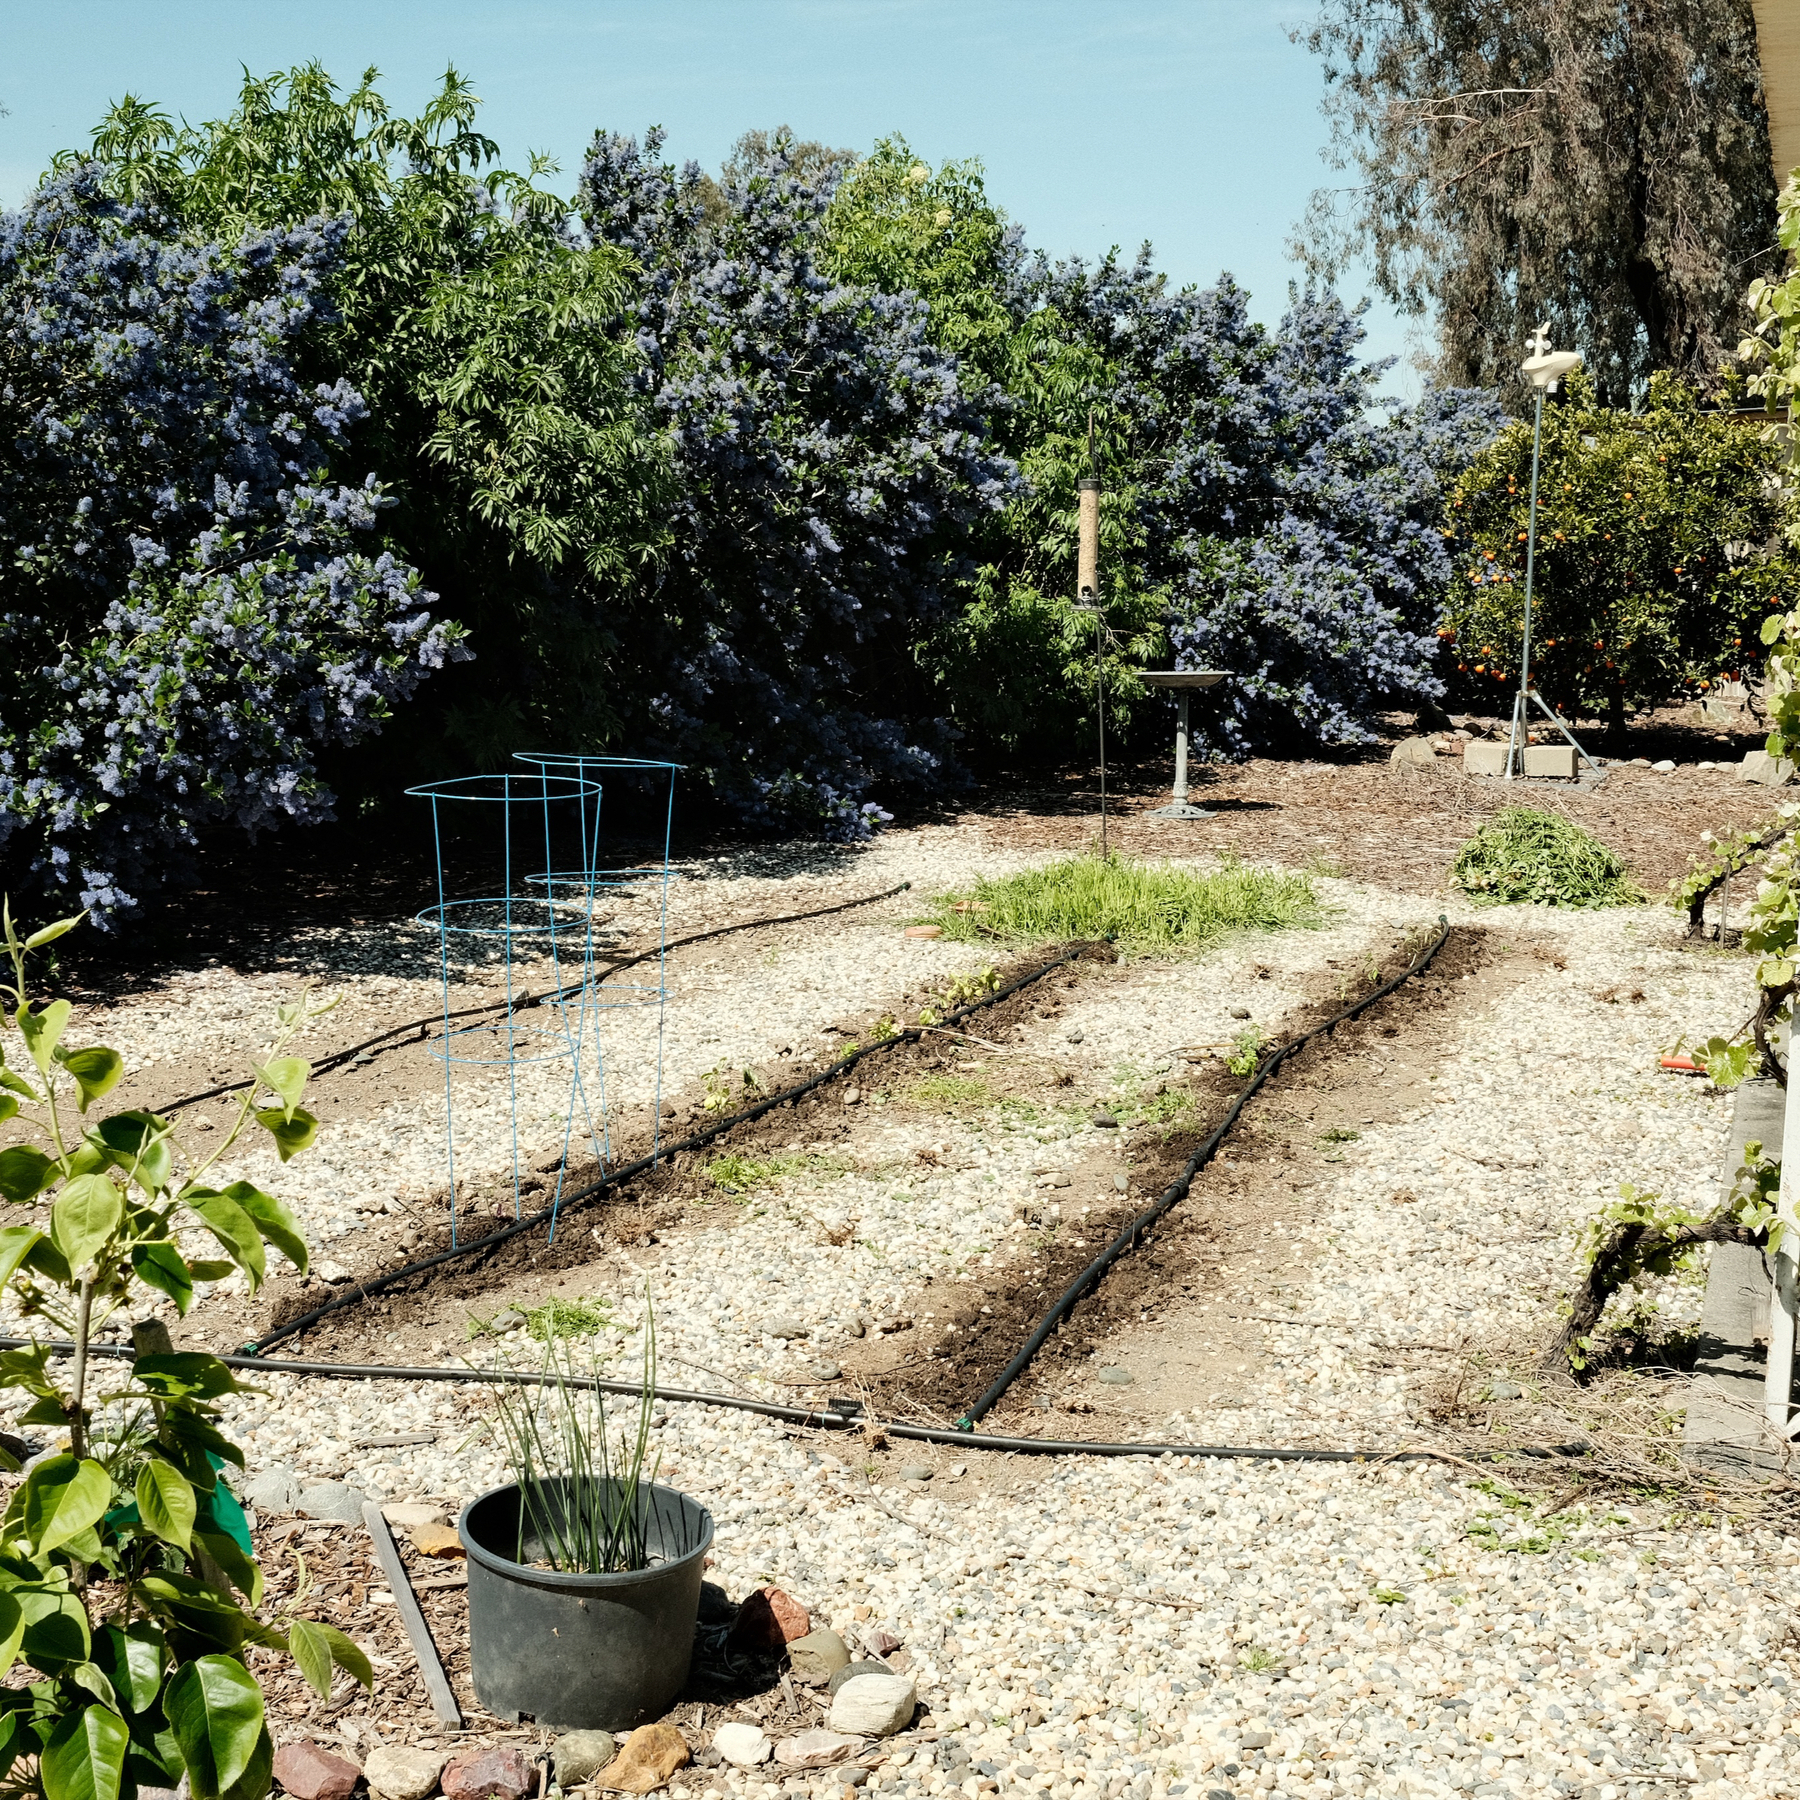 Two planted crop rows with drip tape. In the background are stunningly violet flowers of Ceanothus bushes. To the right of the crop rows is patio with grapes leafing out below the awning. Gravel makes up paths between crop rows.